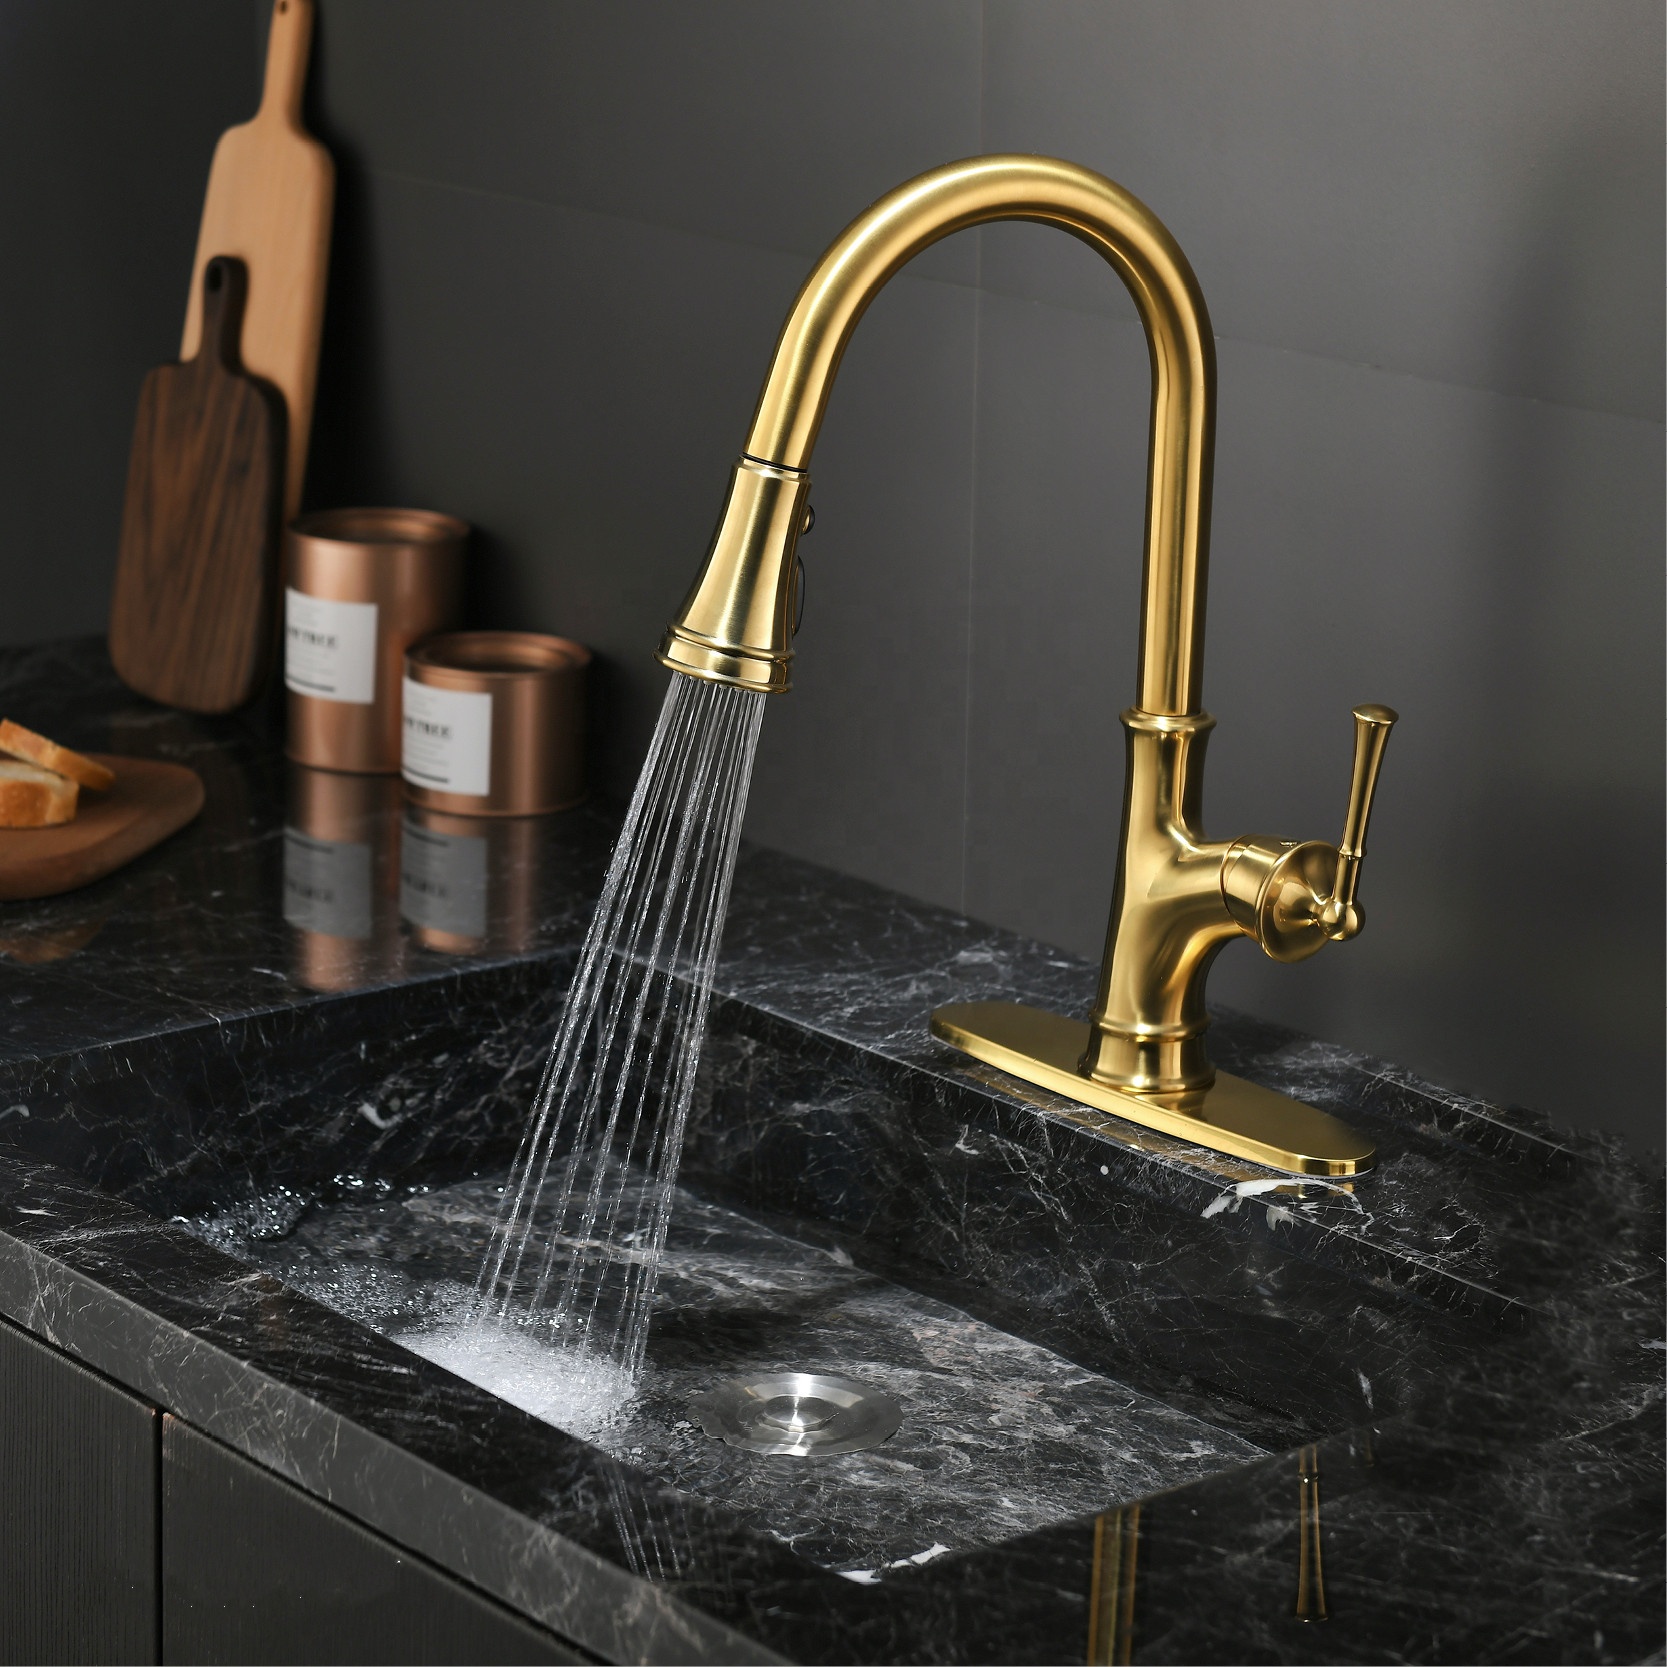 Kitchen Faucet Luxury Hot And Cold Brushed Gold Kitchen Faucet Gooseneck Faucet